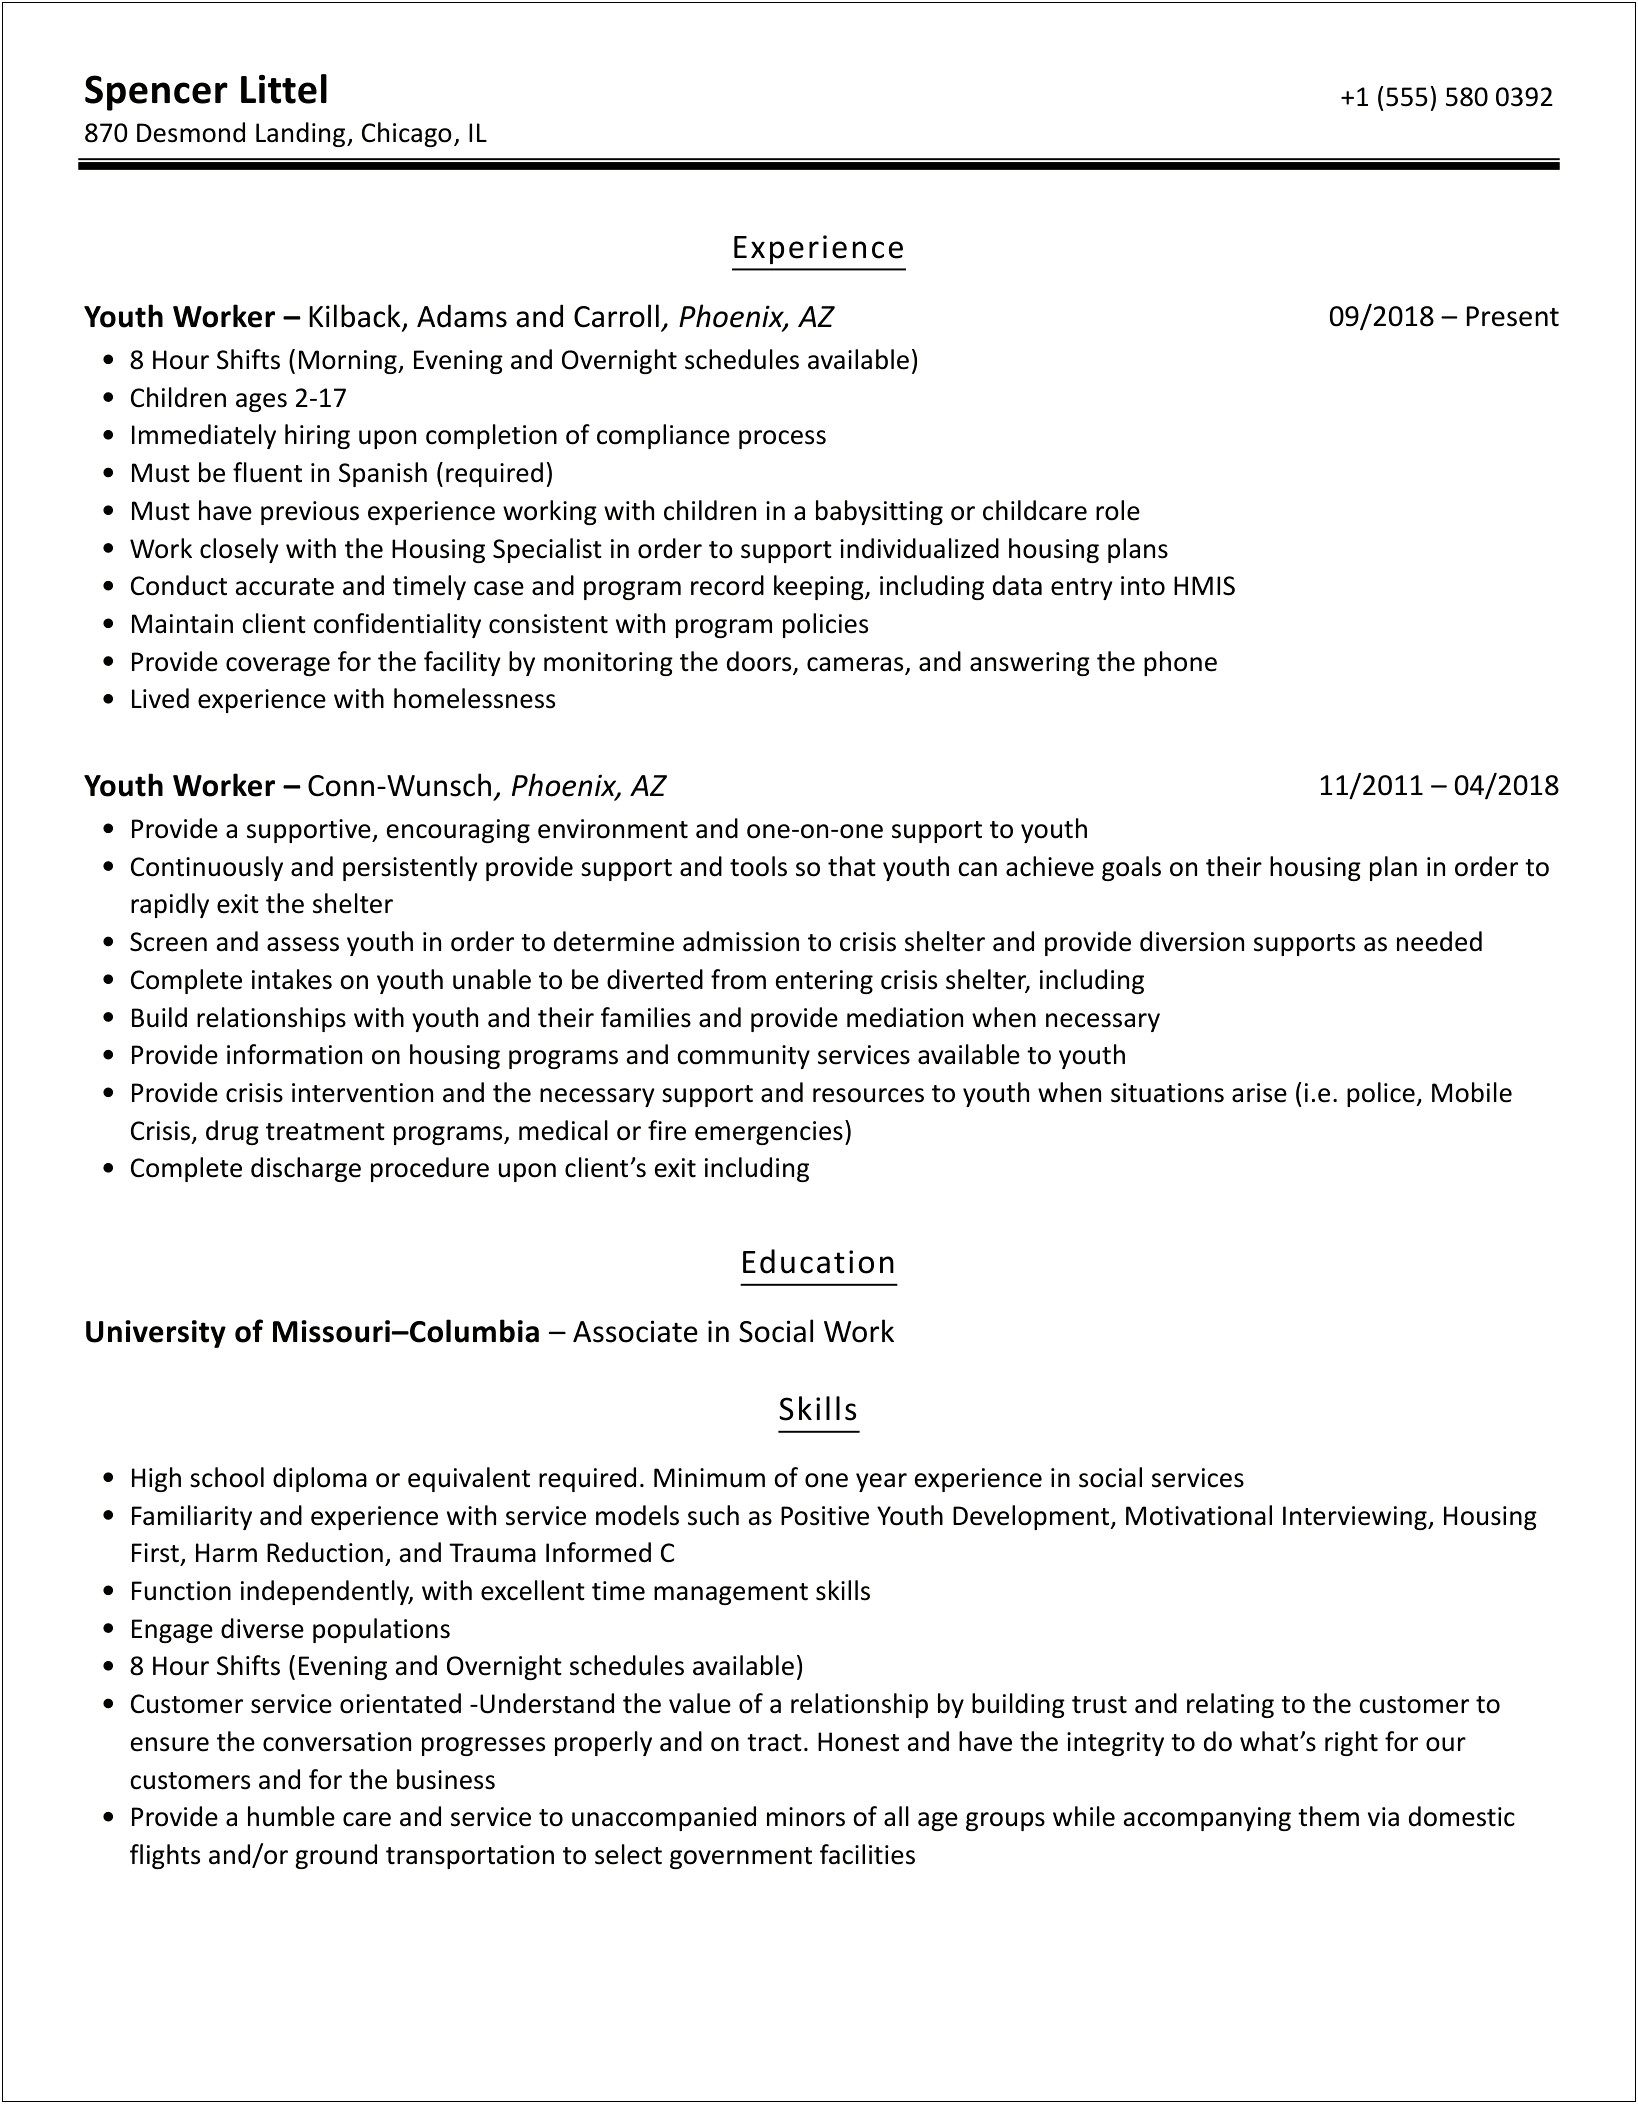 Home Care Worker To Youth Individual Resume